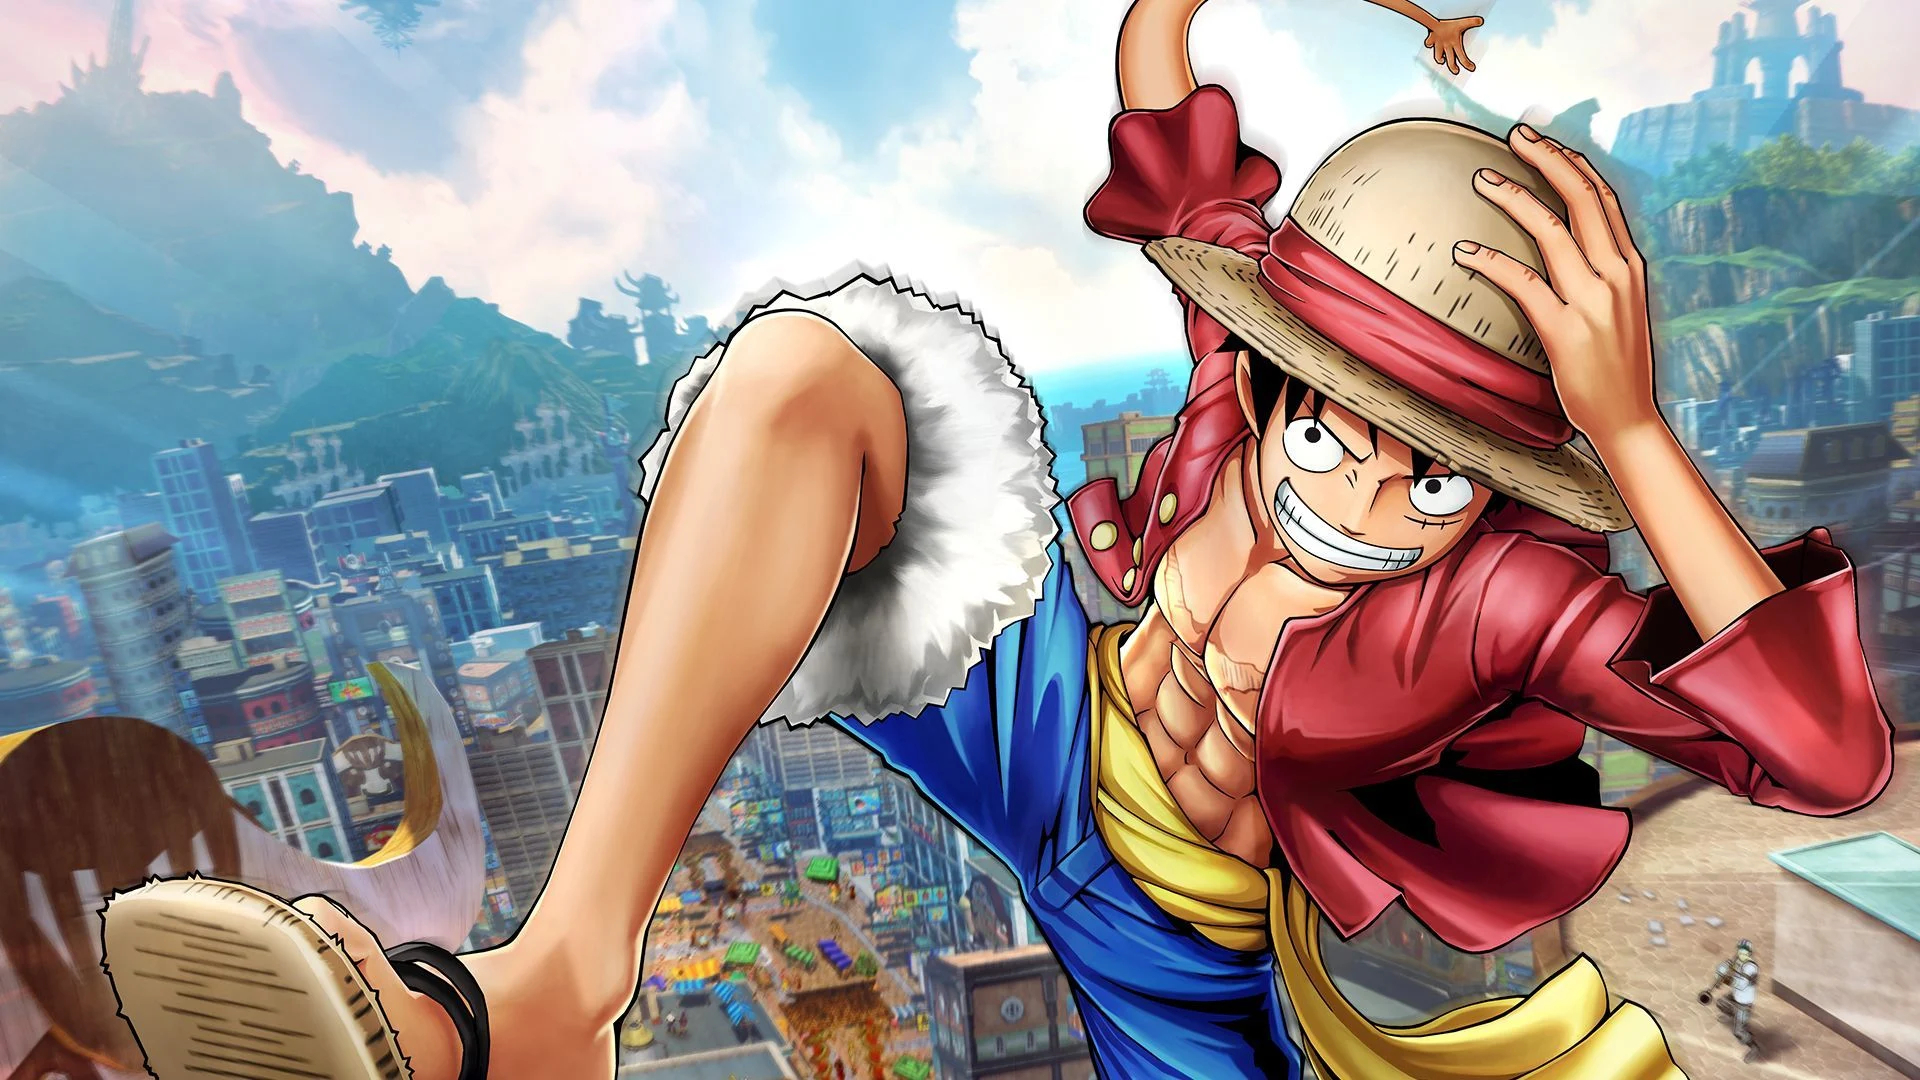 1920x1080 One Piece Laptop Wallpapers Top Free One Piece Laptop Backgrounds